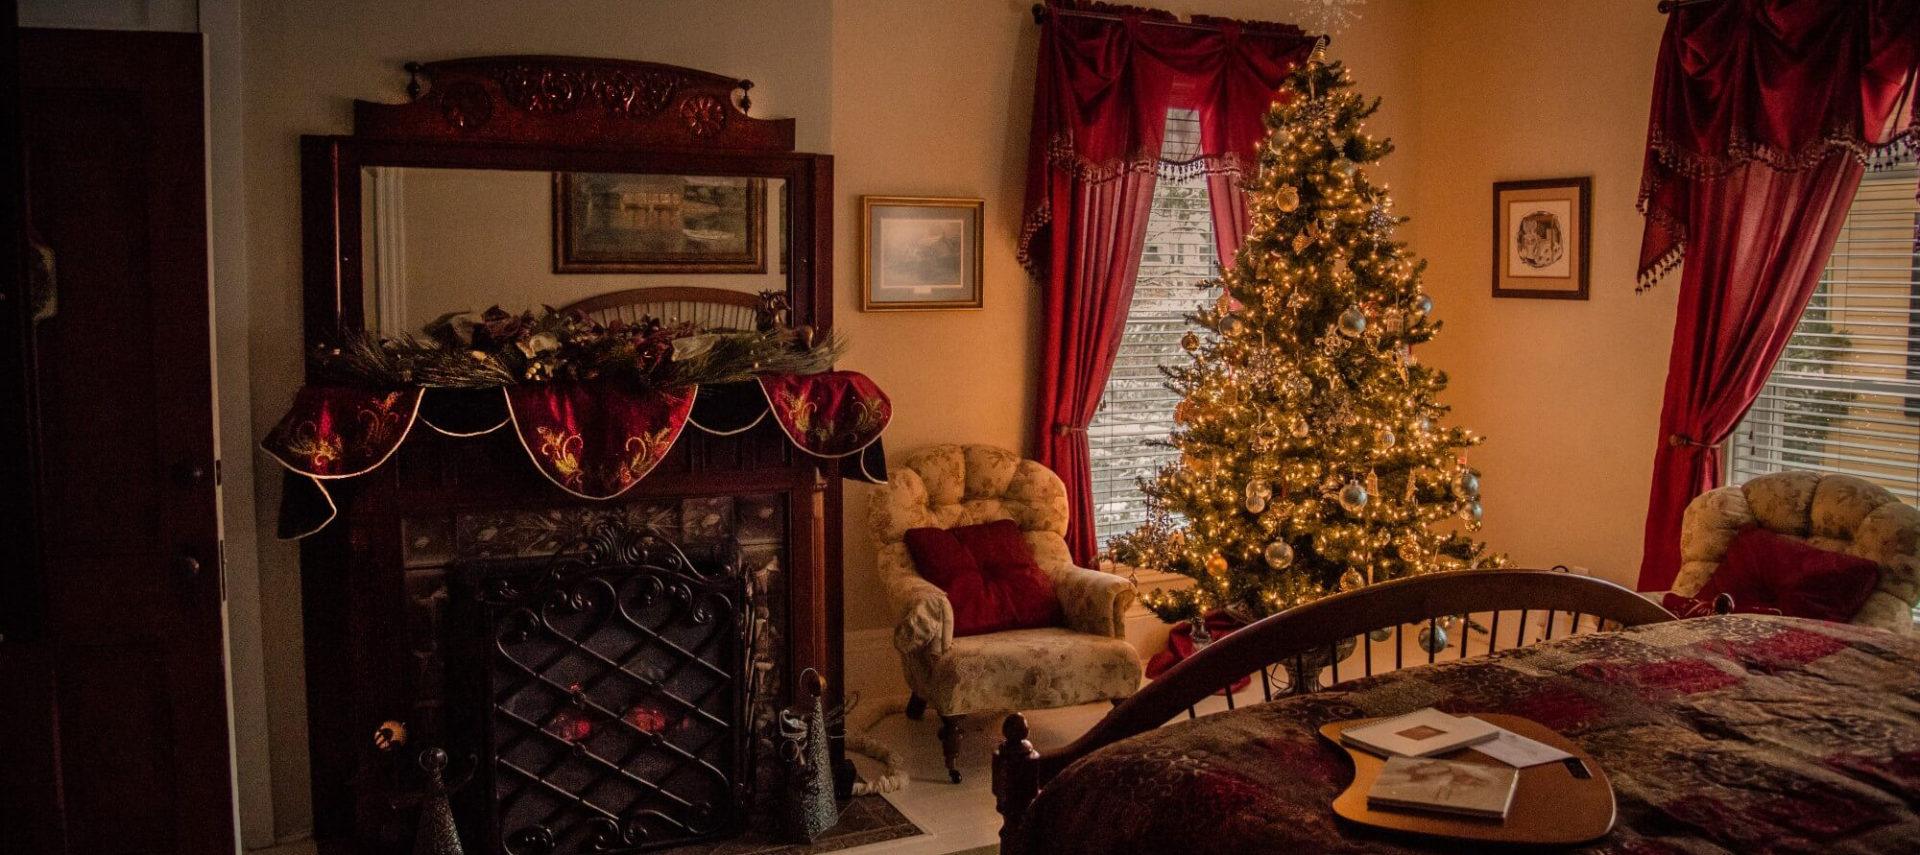 King bed with wheat footboard, burgundy bedding and view of vintage tiled fireplace with beige print upholstered chairs and Christmas tree